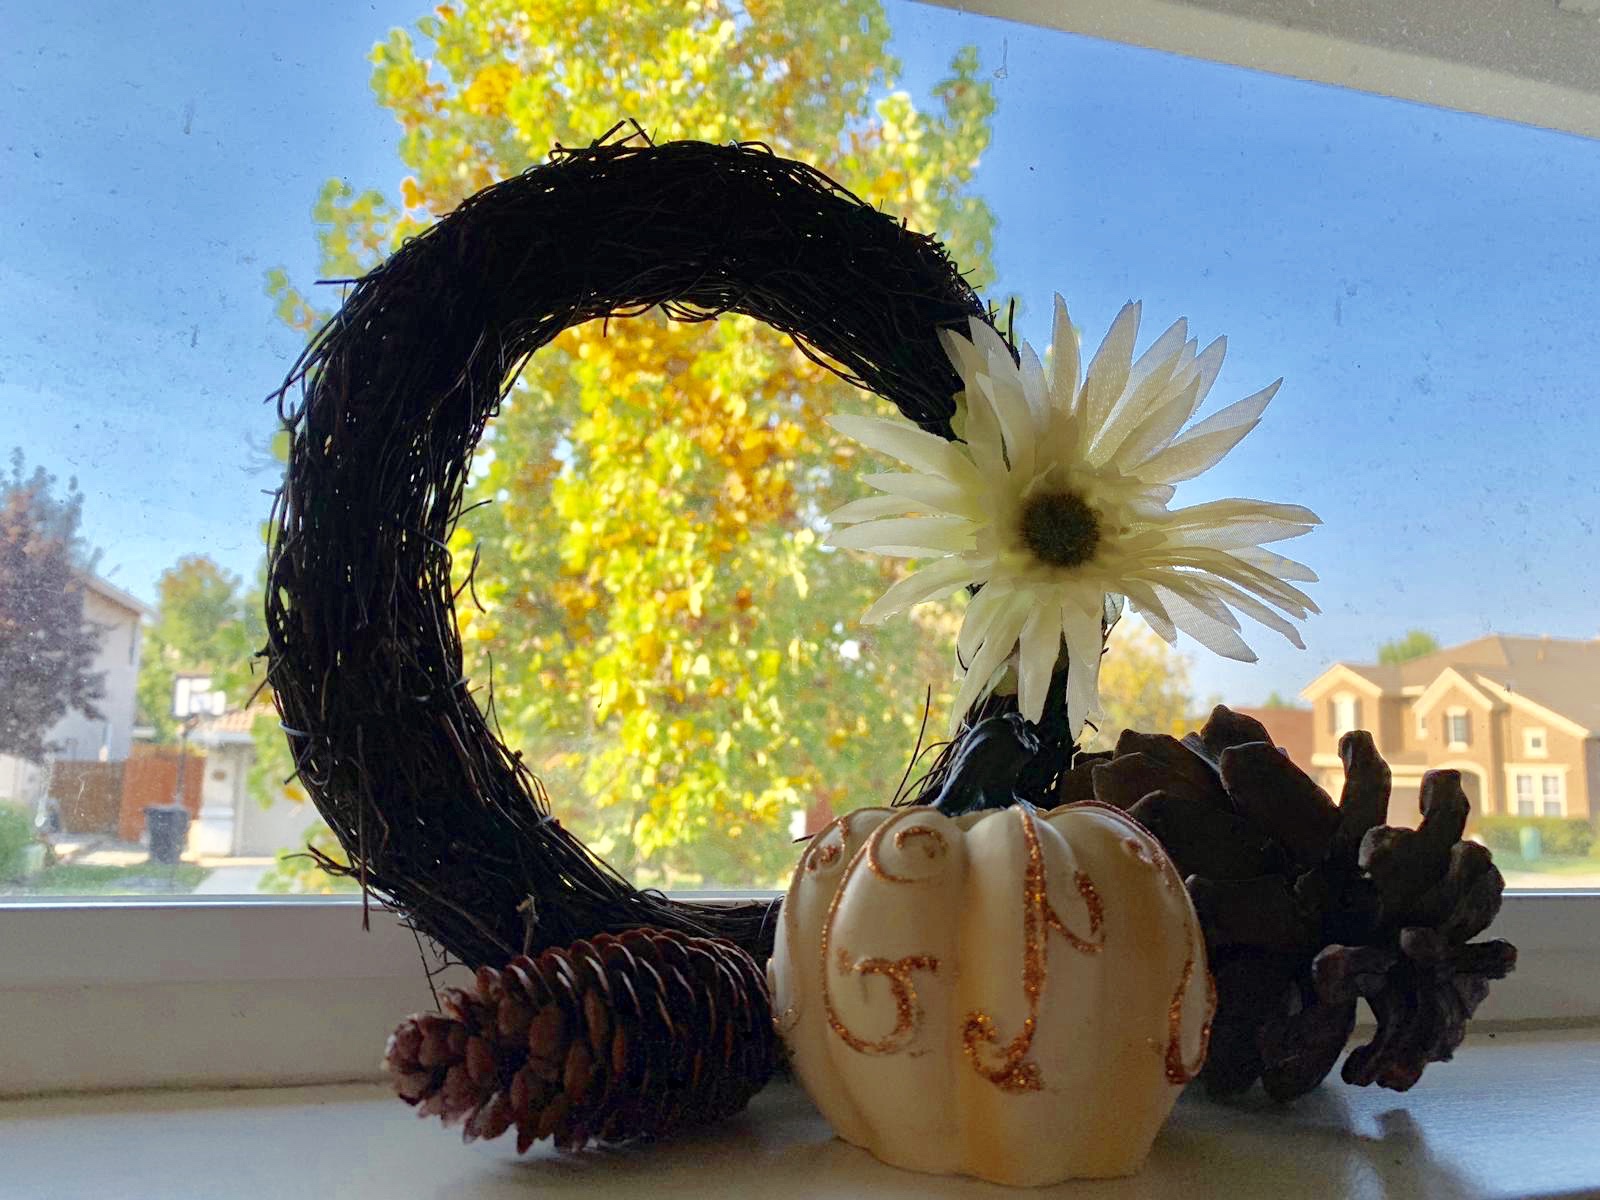 Wreath with a seasonal flower, decorated mini-pumpkin and some pine ones.